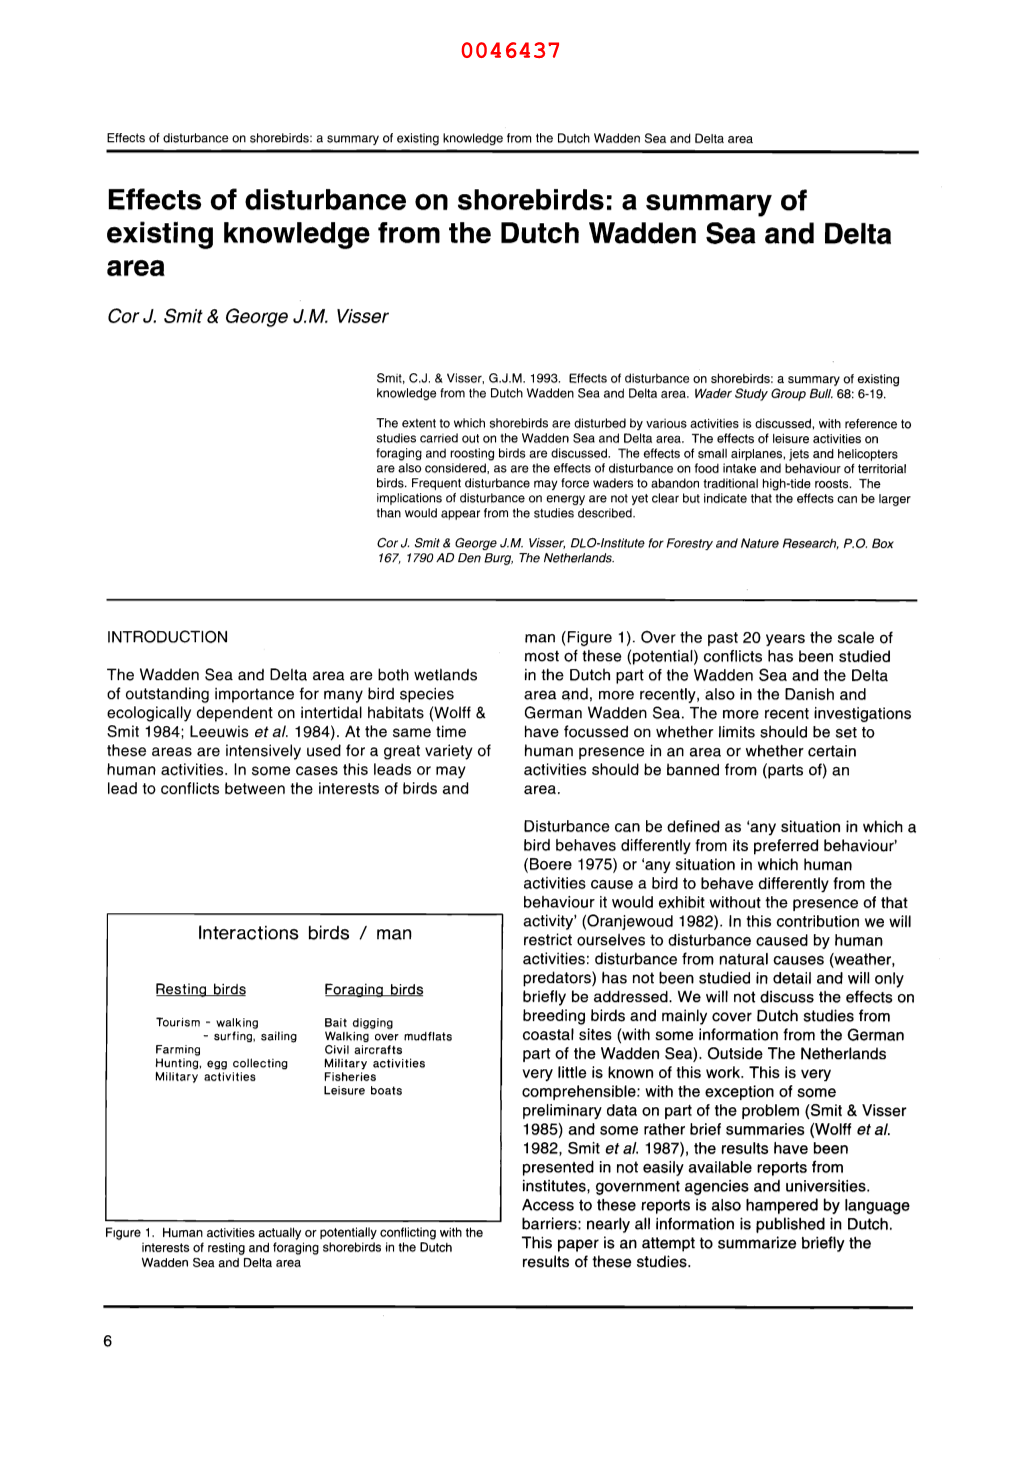 A Summary of Existing Knowledge from the Dutch Wadden Sea and Delta Area